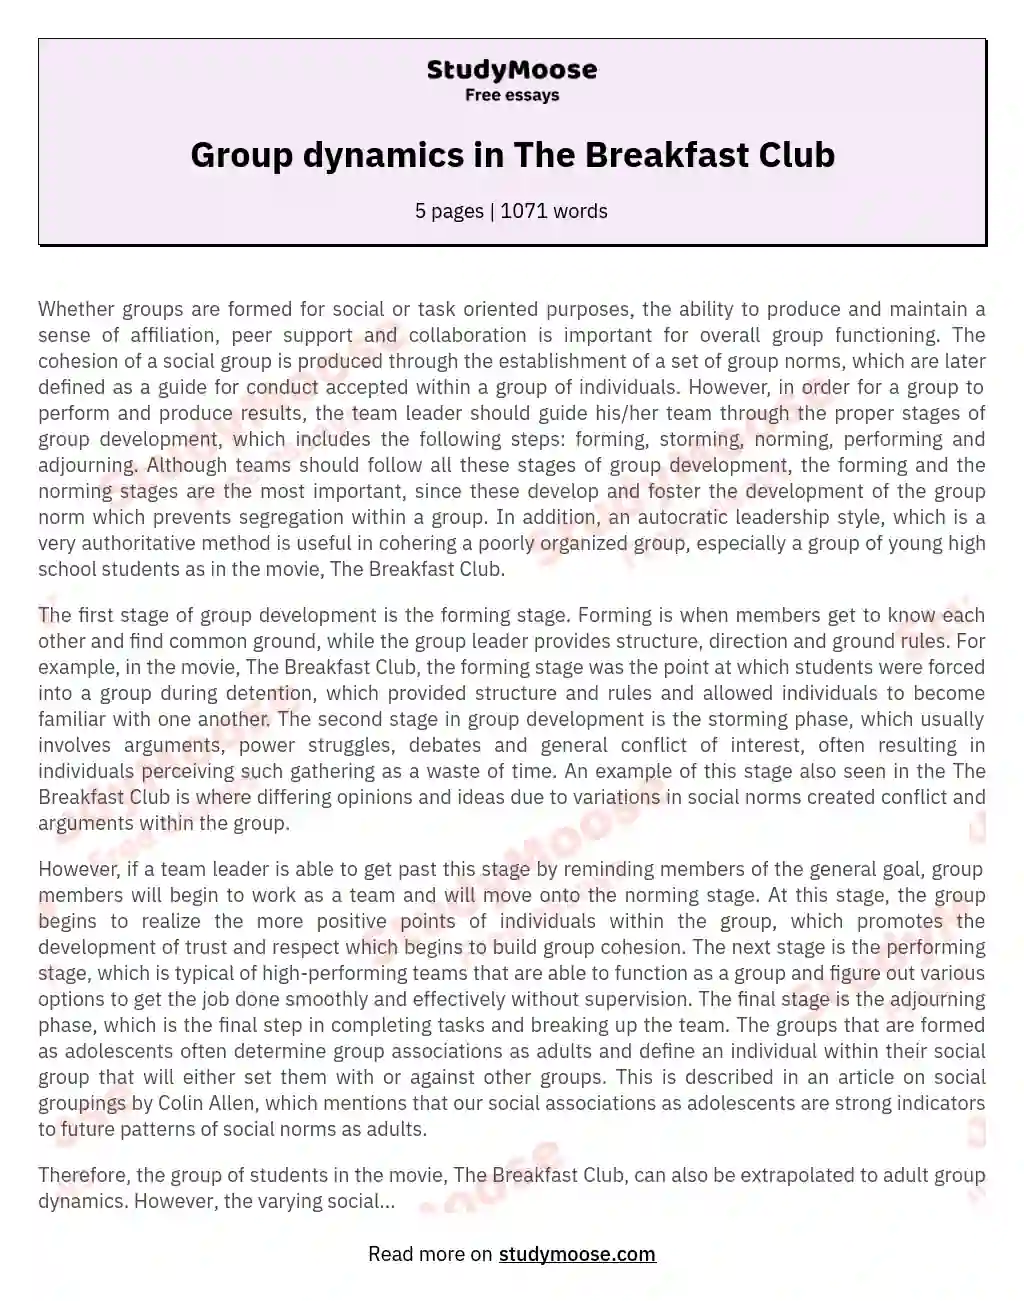 Group dynamics in The Breakfast Club